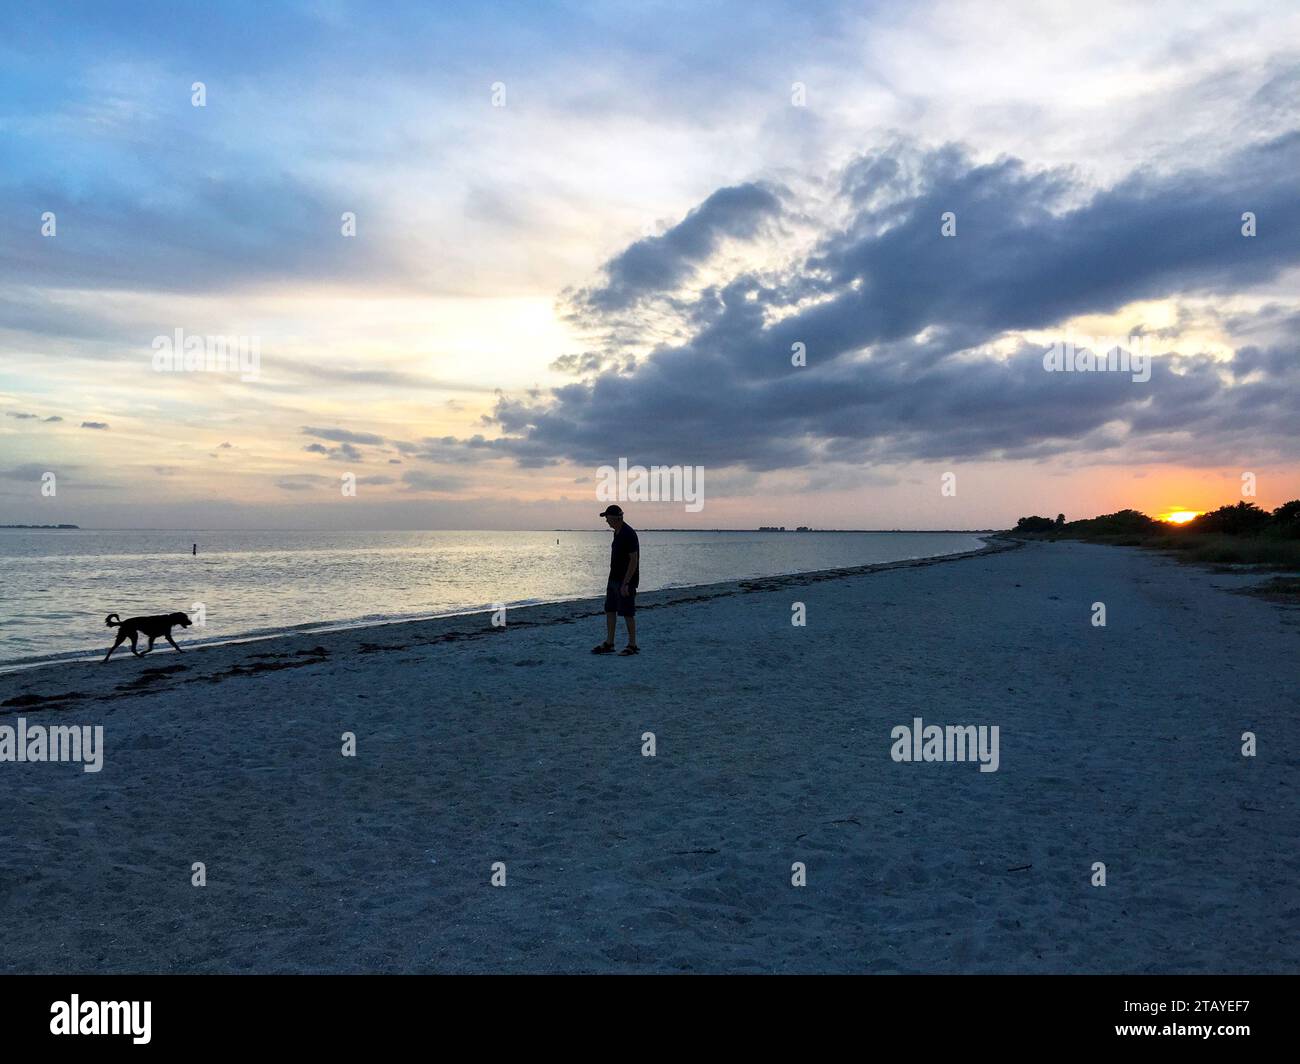 A senior man runs his dog on the beach at sunset. Concept of solo travel, loneliness and isolation. Stock Photo